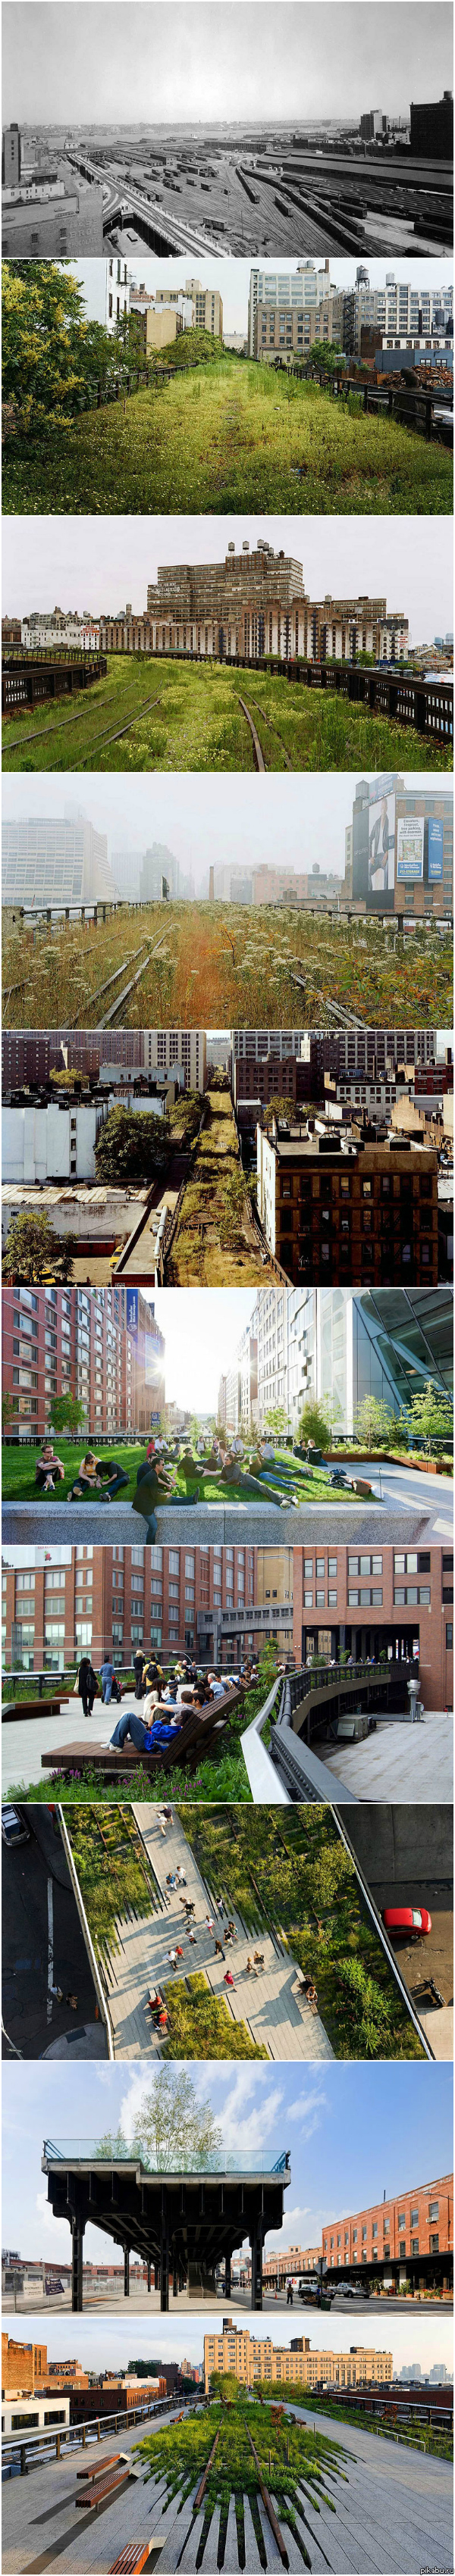    - - (The High Line)        10    ,       ()